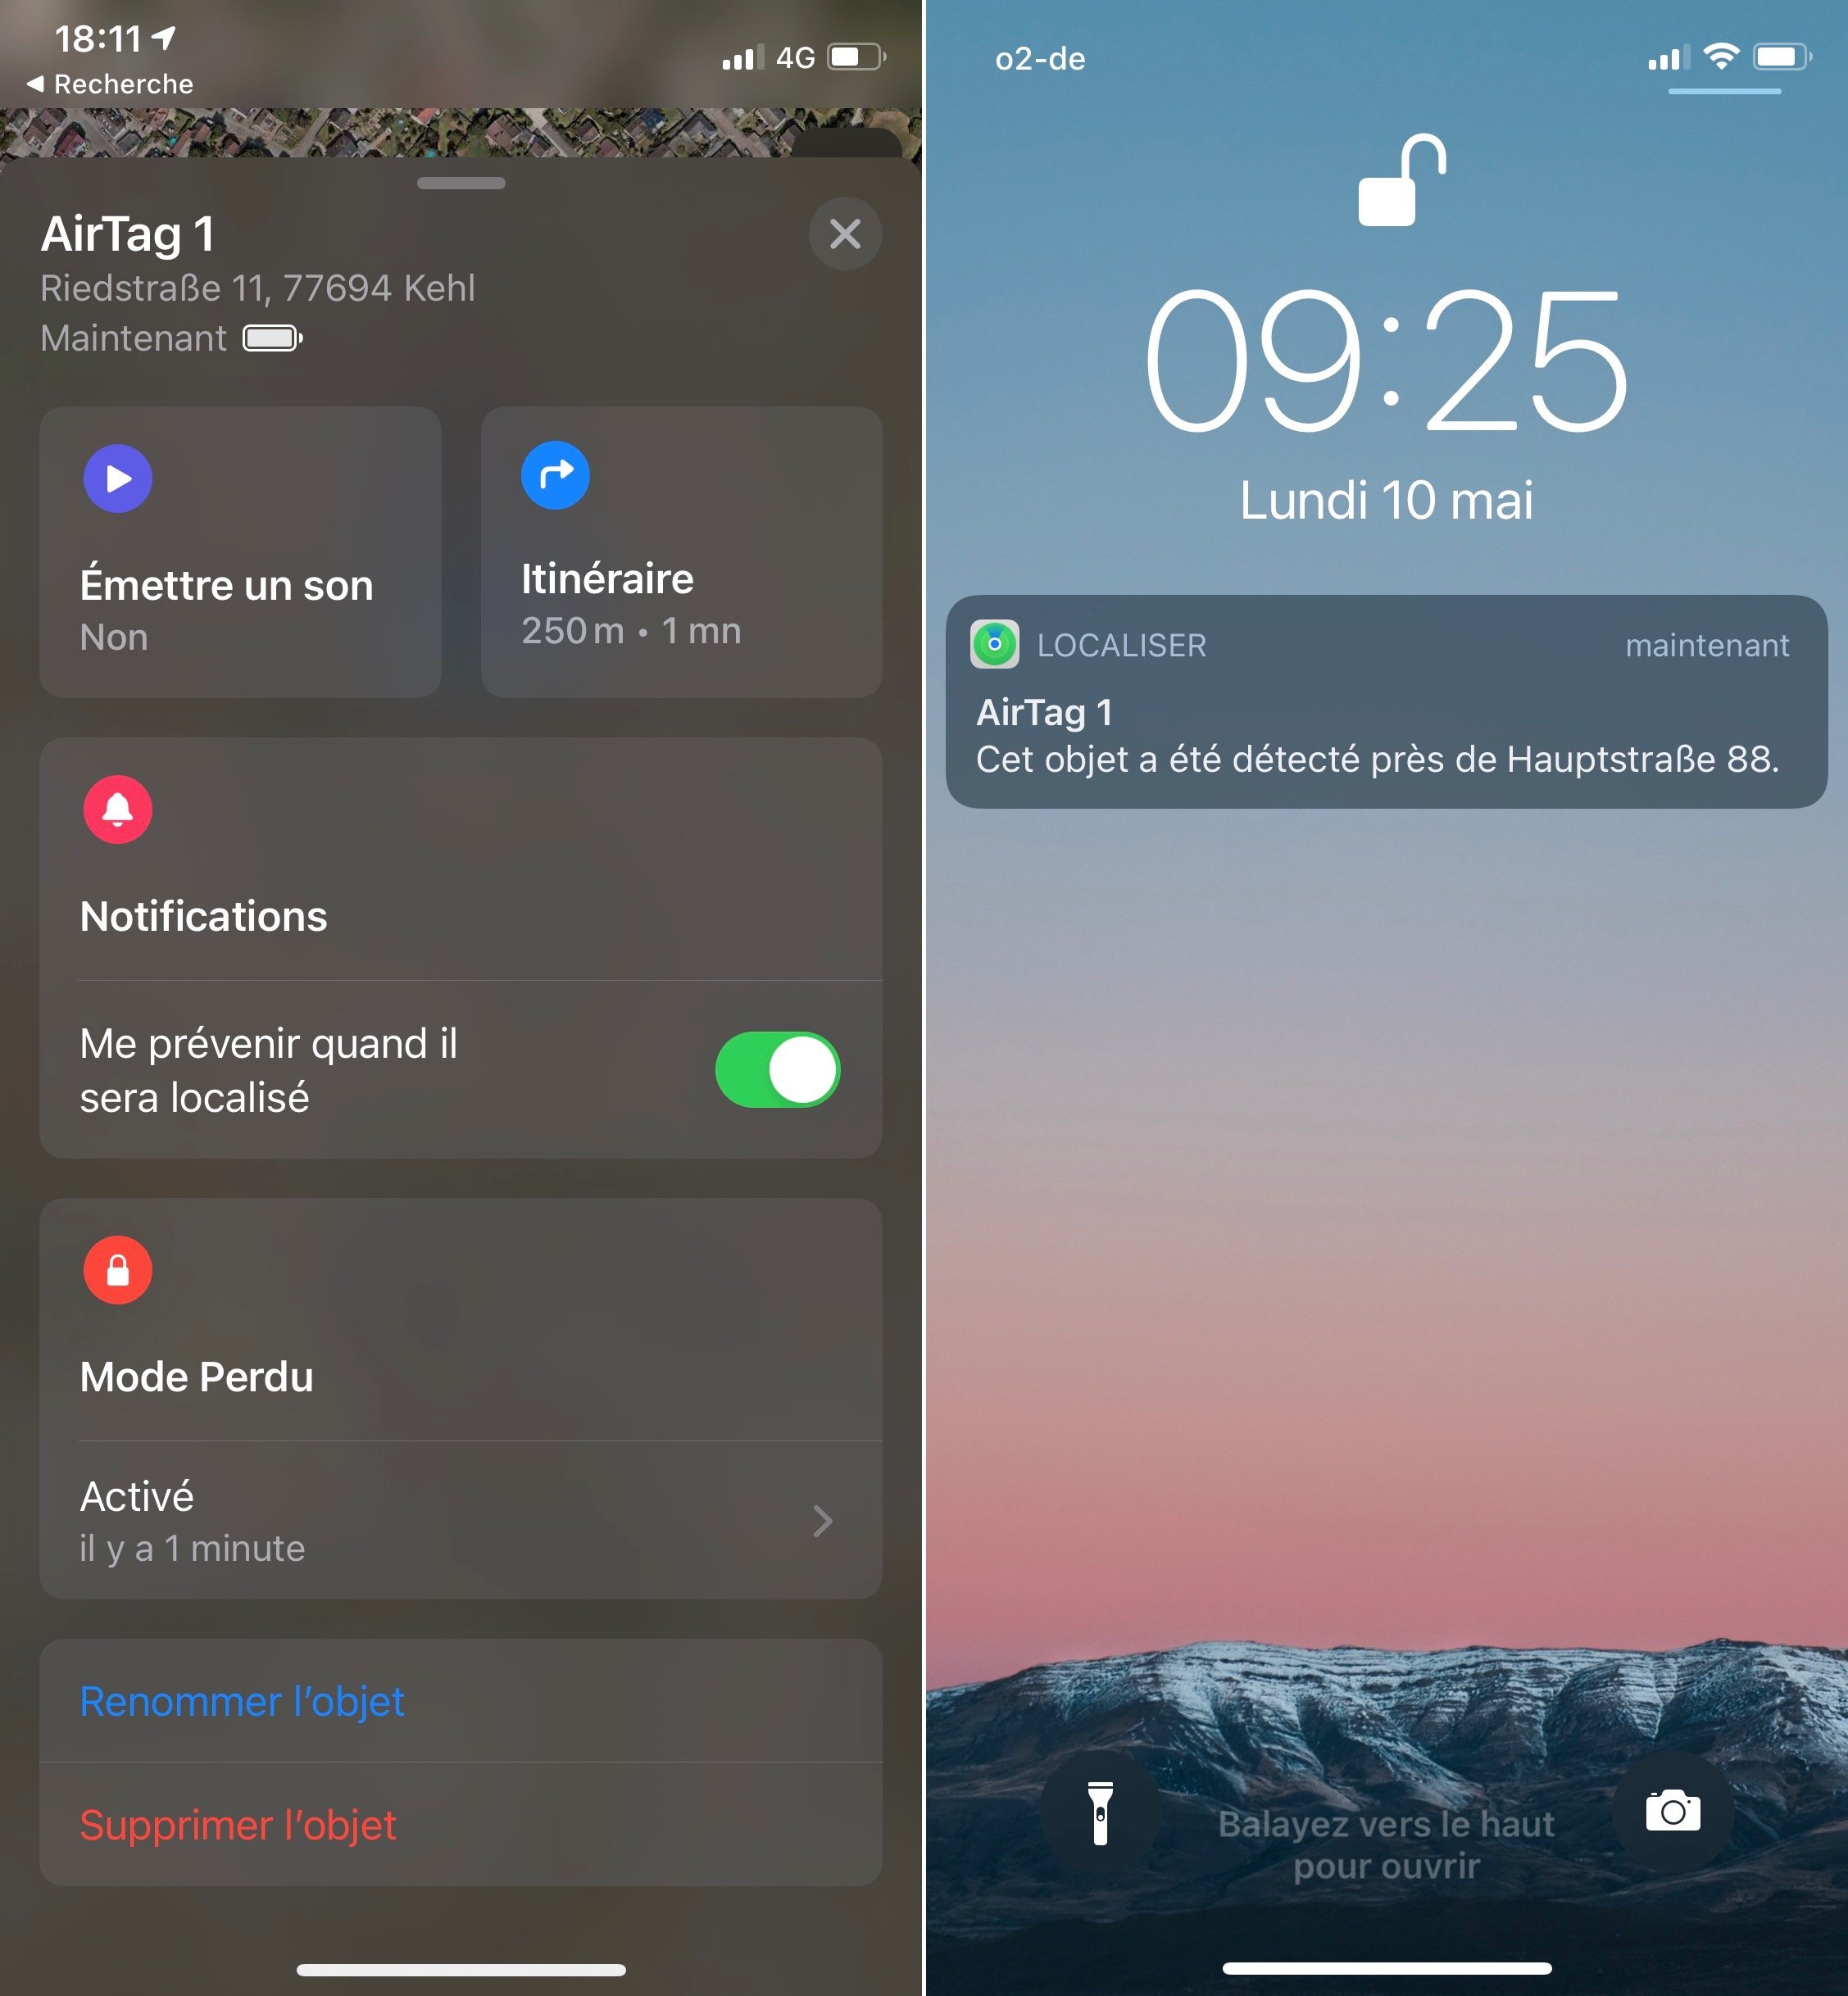 AirTag notifications